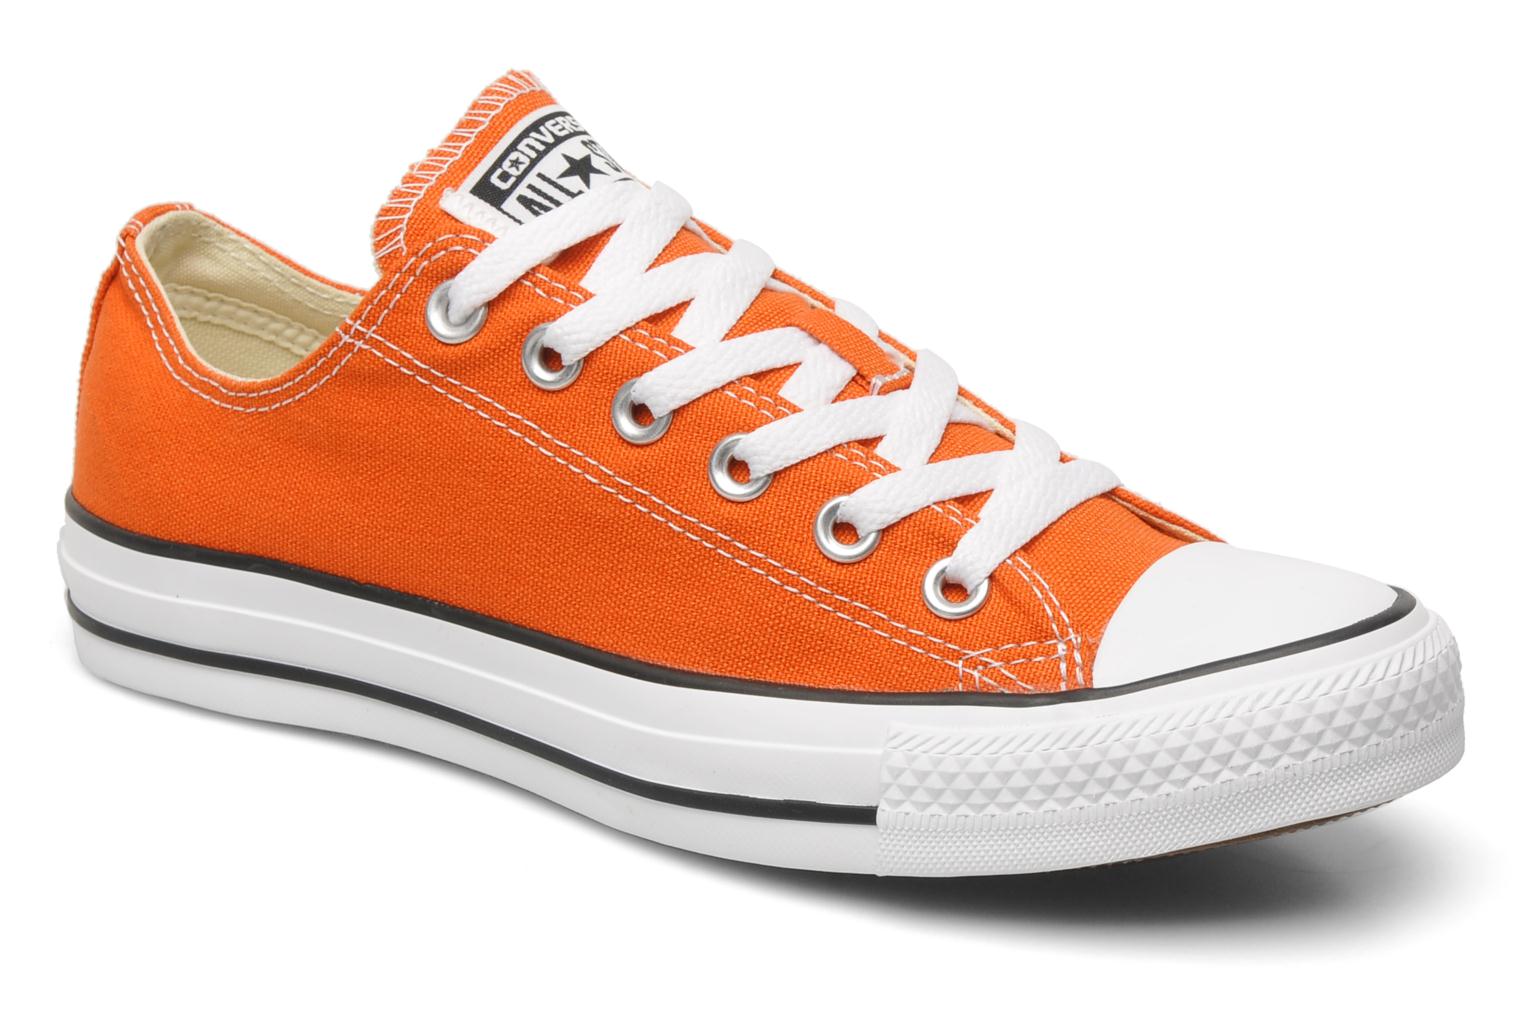 orange converse all star shoes